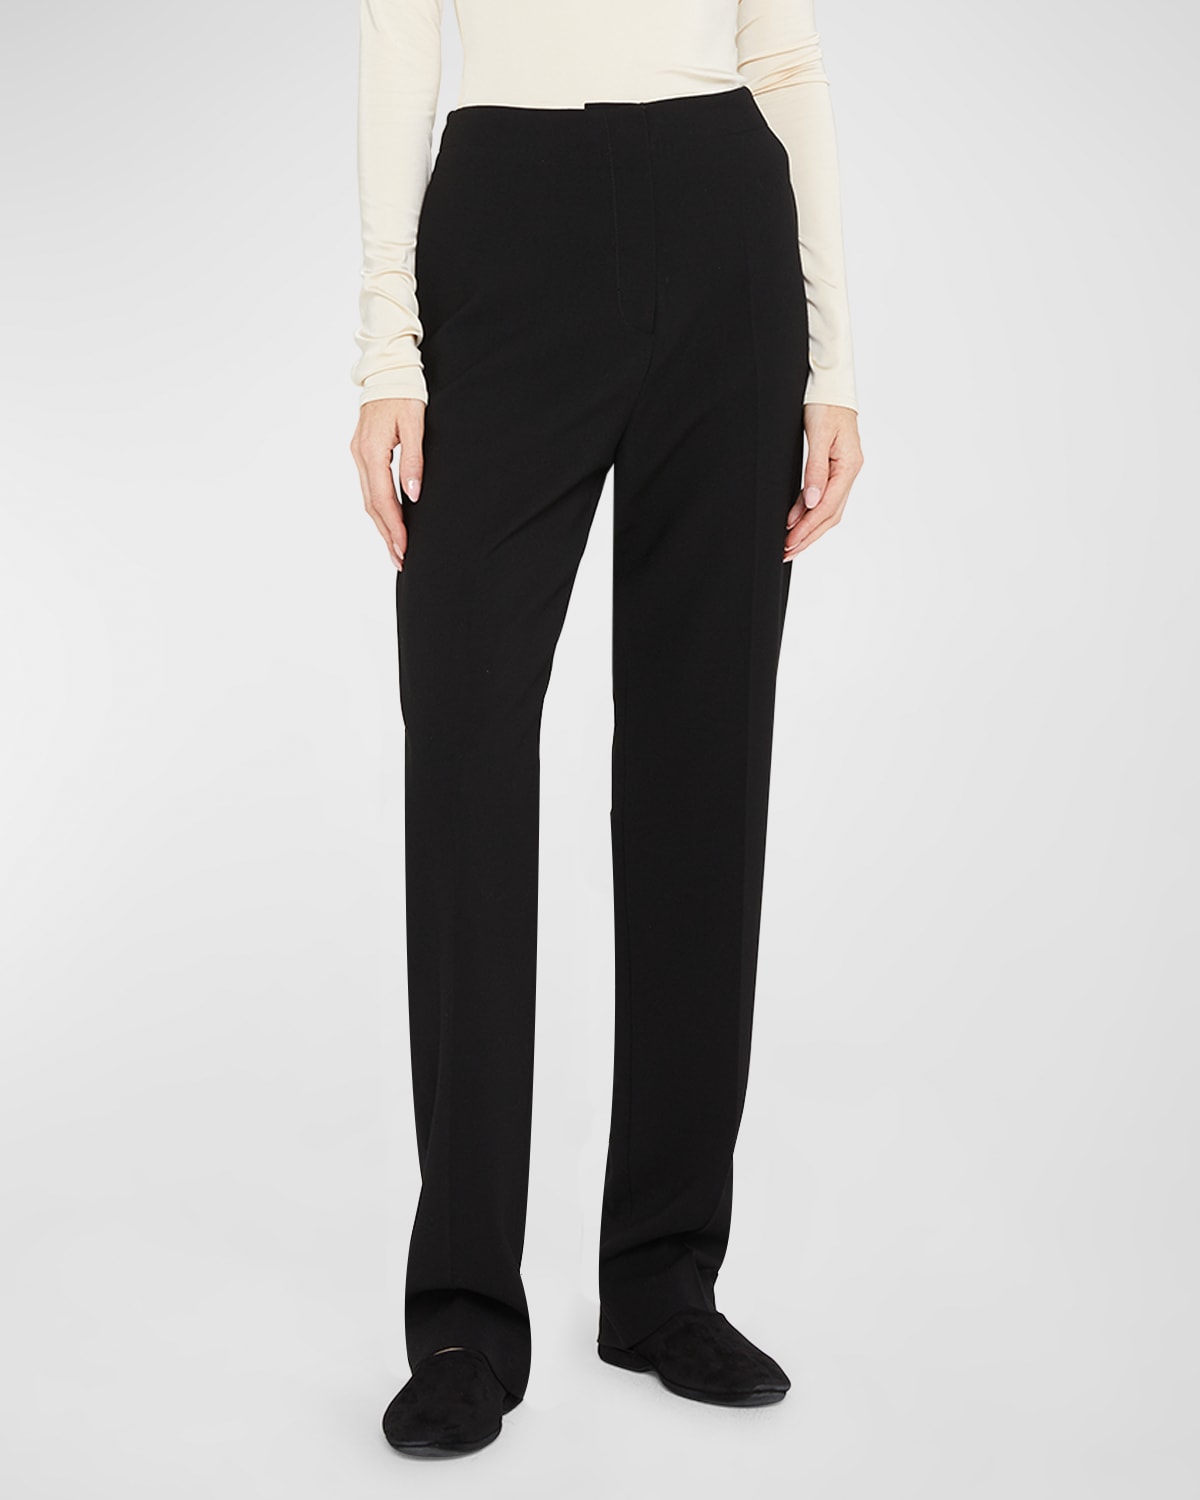 Lucia Tailored Trousers